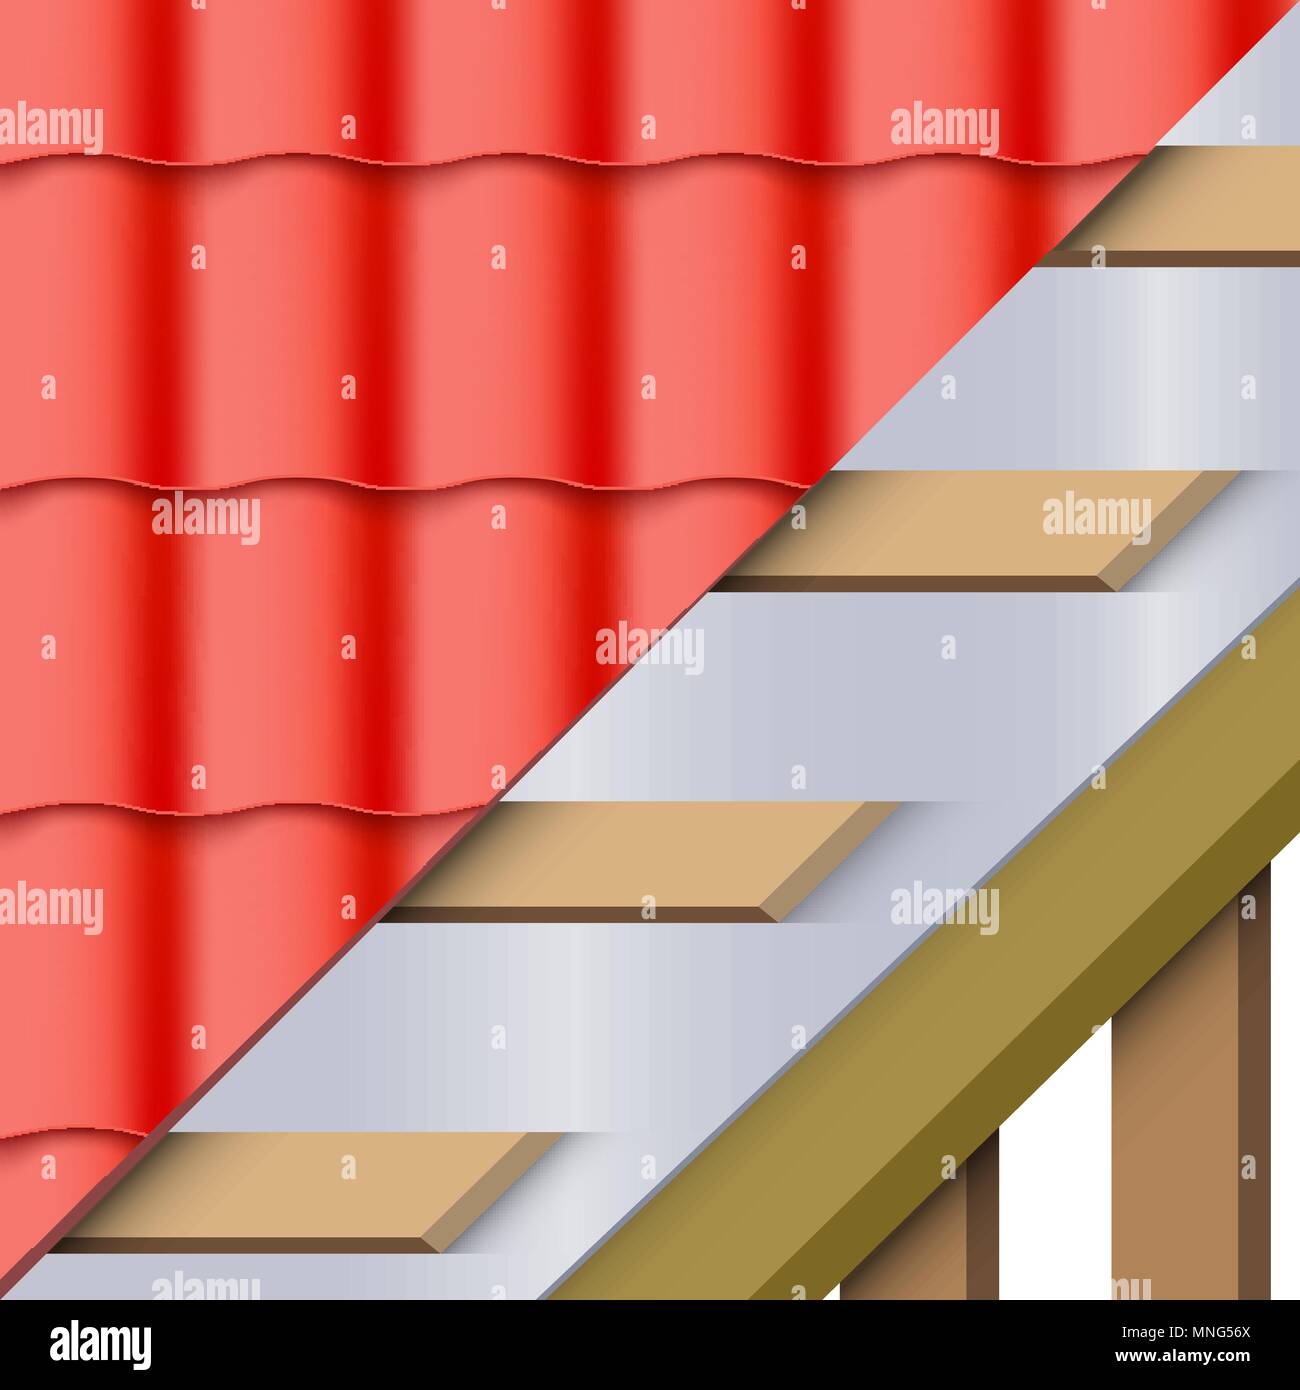 Red ceramic tiles roofing cover and layers Stock Vector